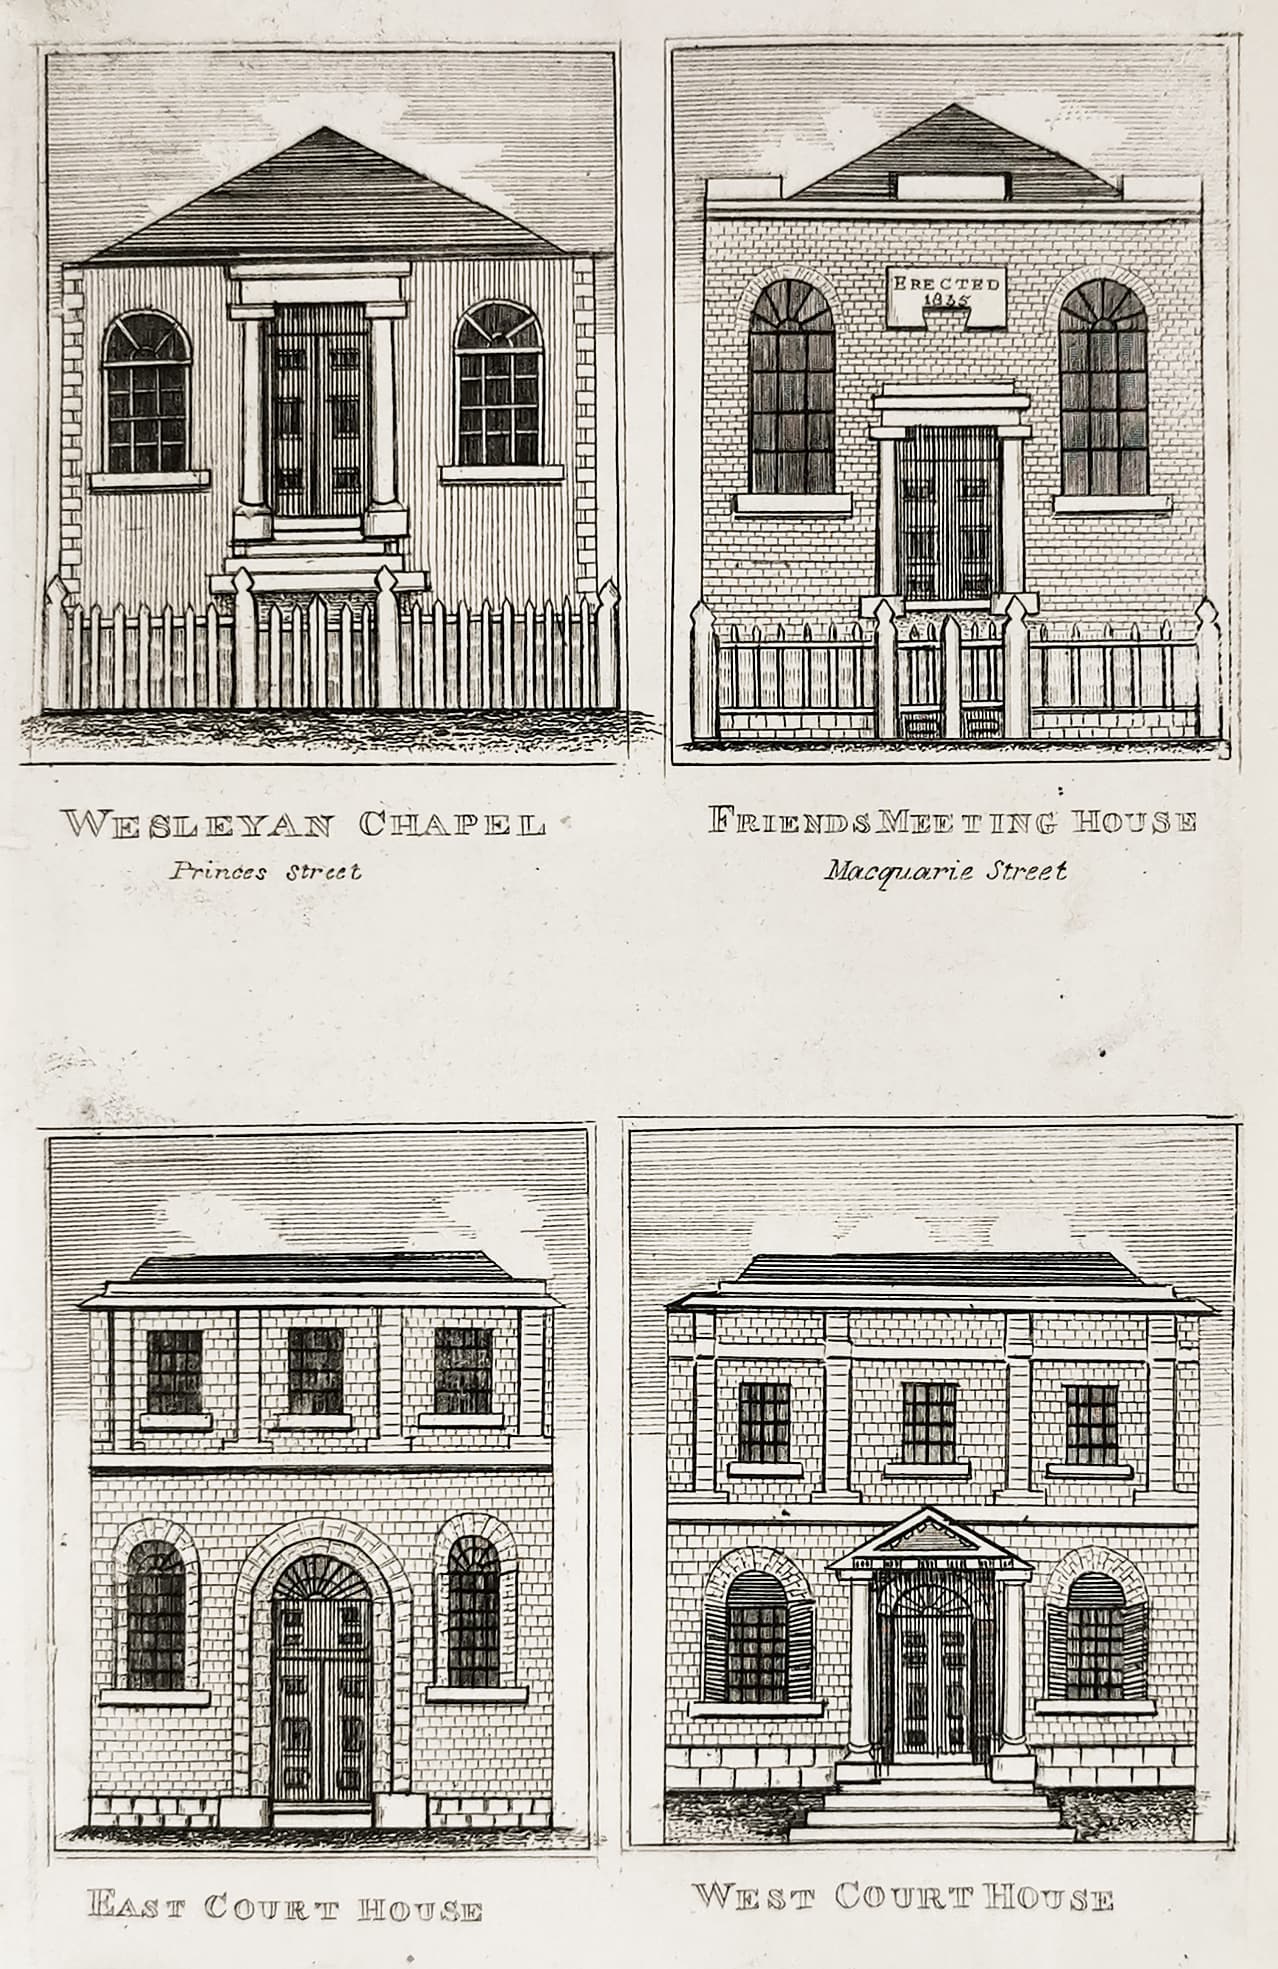 Wesleyan Chapel Princes Street. Friends Meeting House Macquarie Street. East Court House. West Court House. - Antique View from 1839